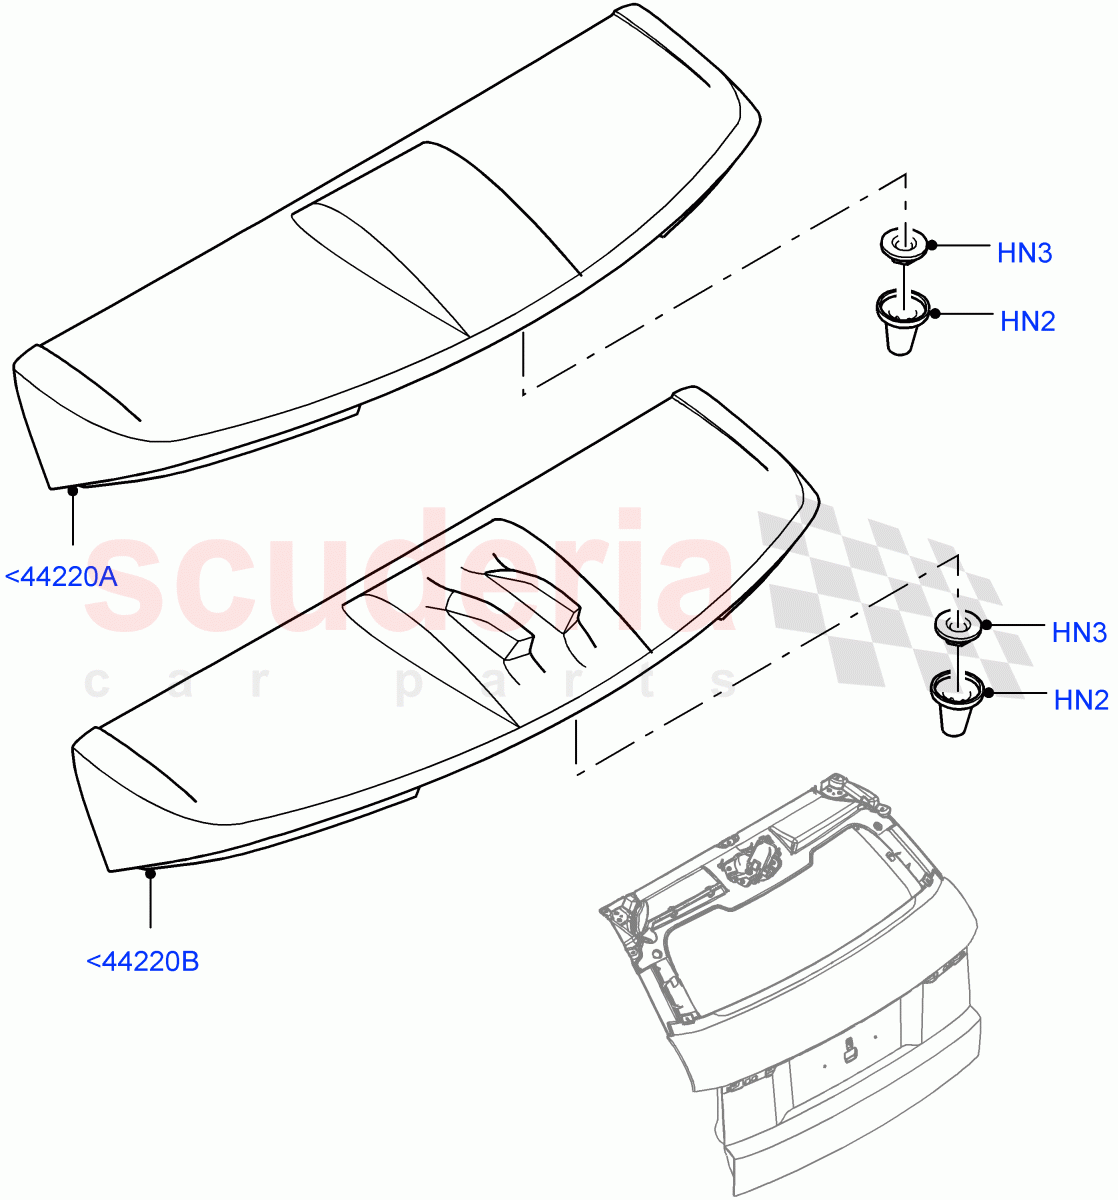 Spoiler And Related Parts(Itatiaia (Brazil))((V)FROMGT000001) of Land Rover Land Rover Range Rover Evoque (2012-2018) [2.0 Turbo Petrol GTDI]